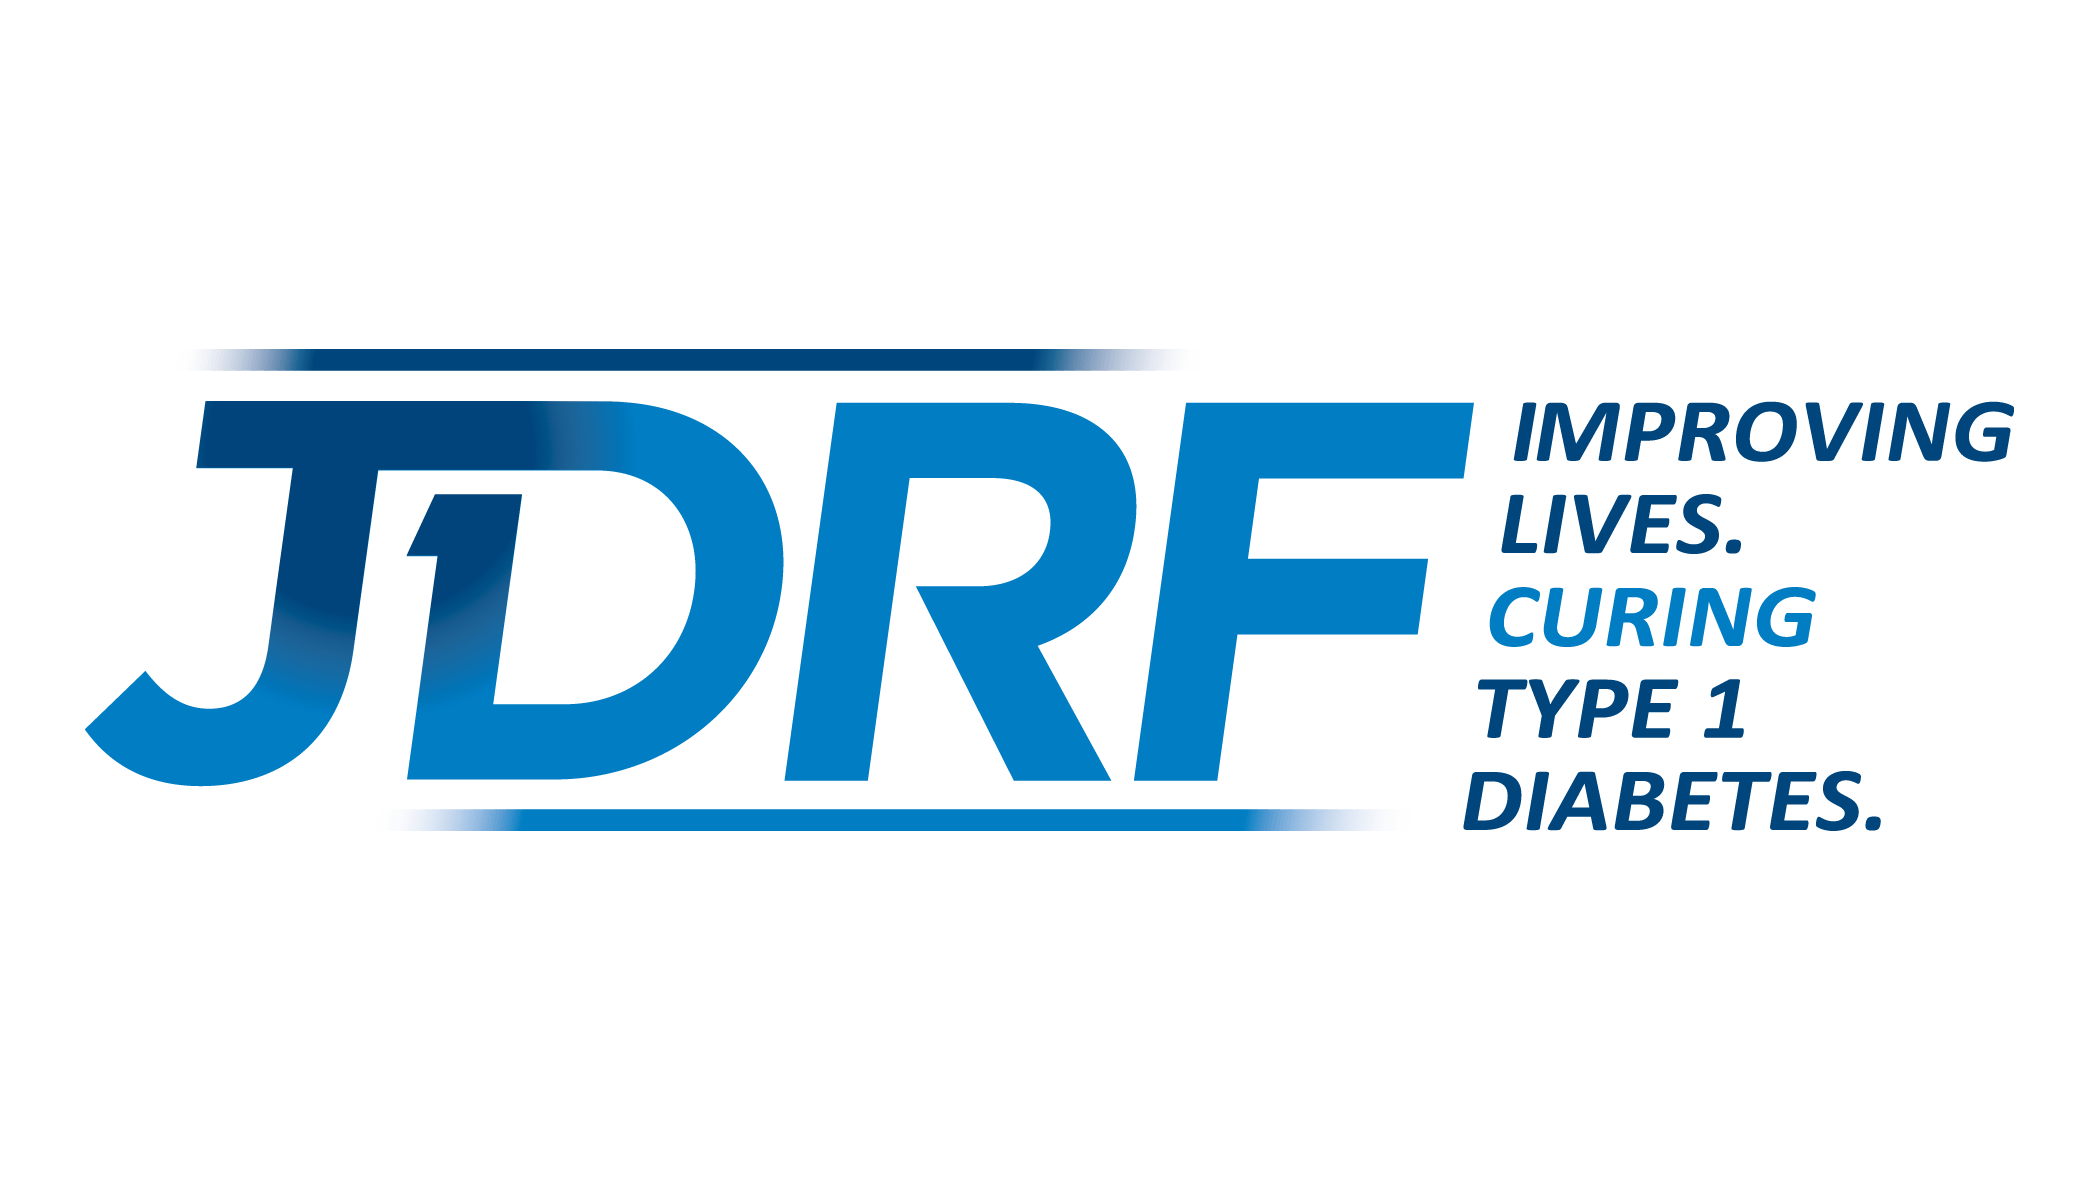 JDRF Logo - JDRF, the type 1 diabetes charity | Funding research to cure type 1